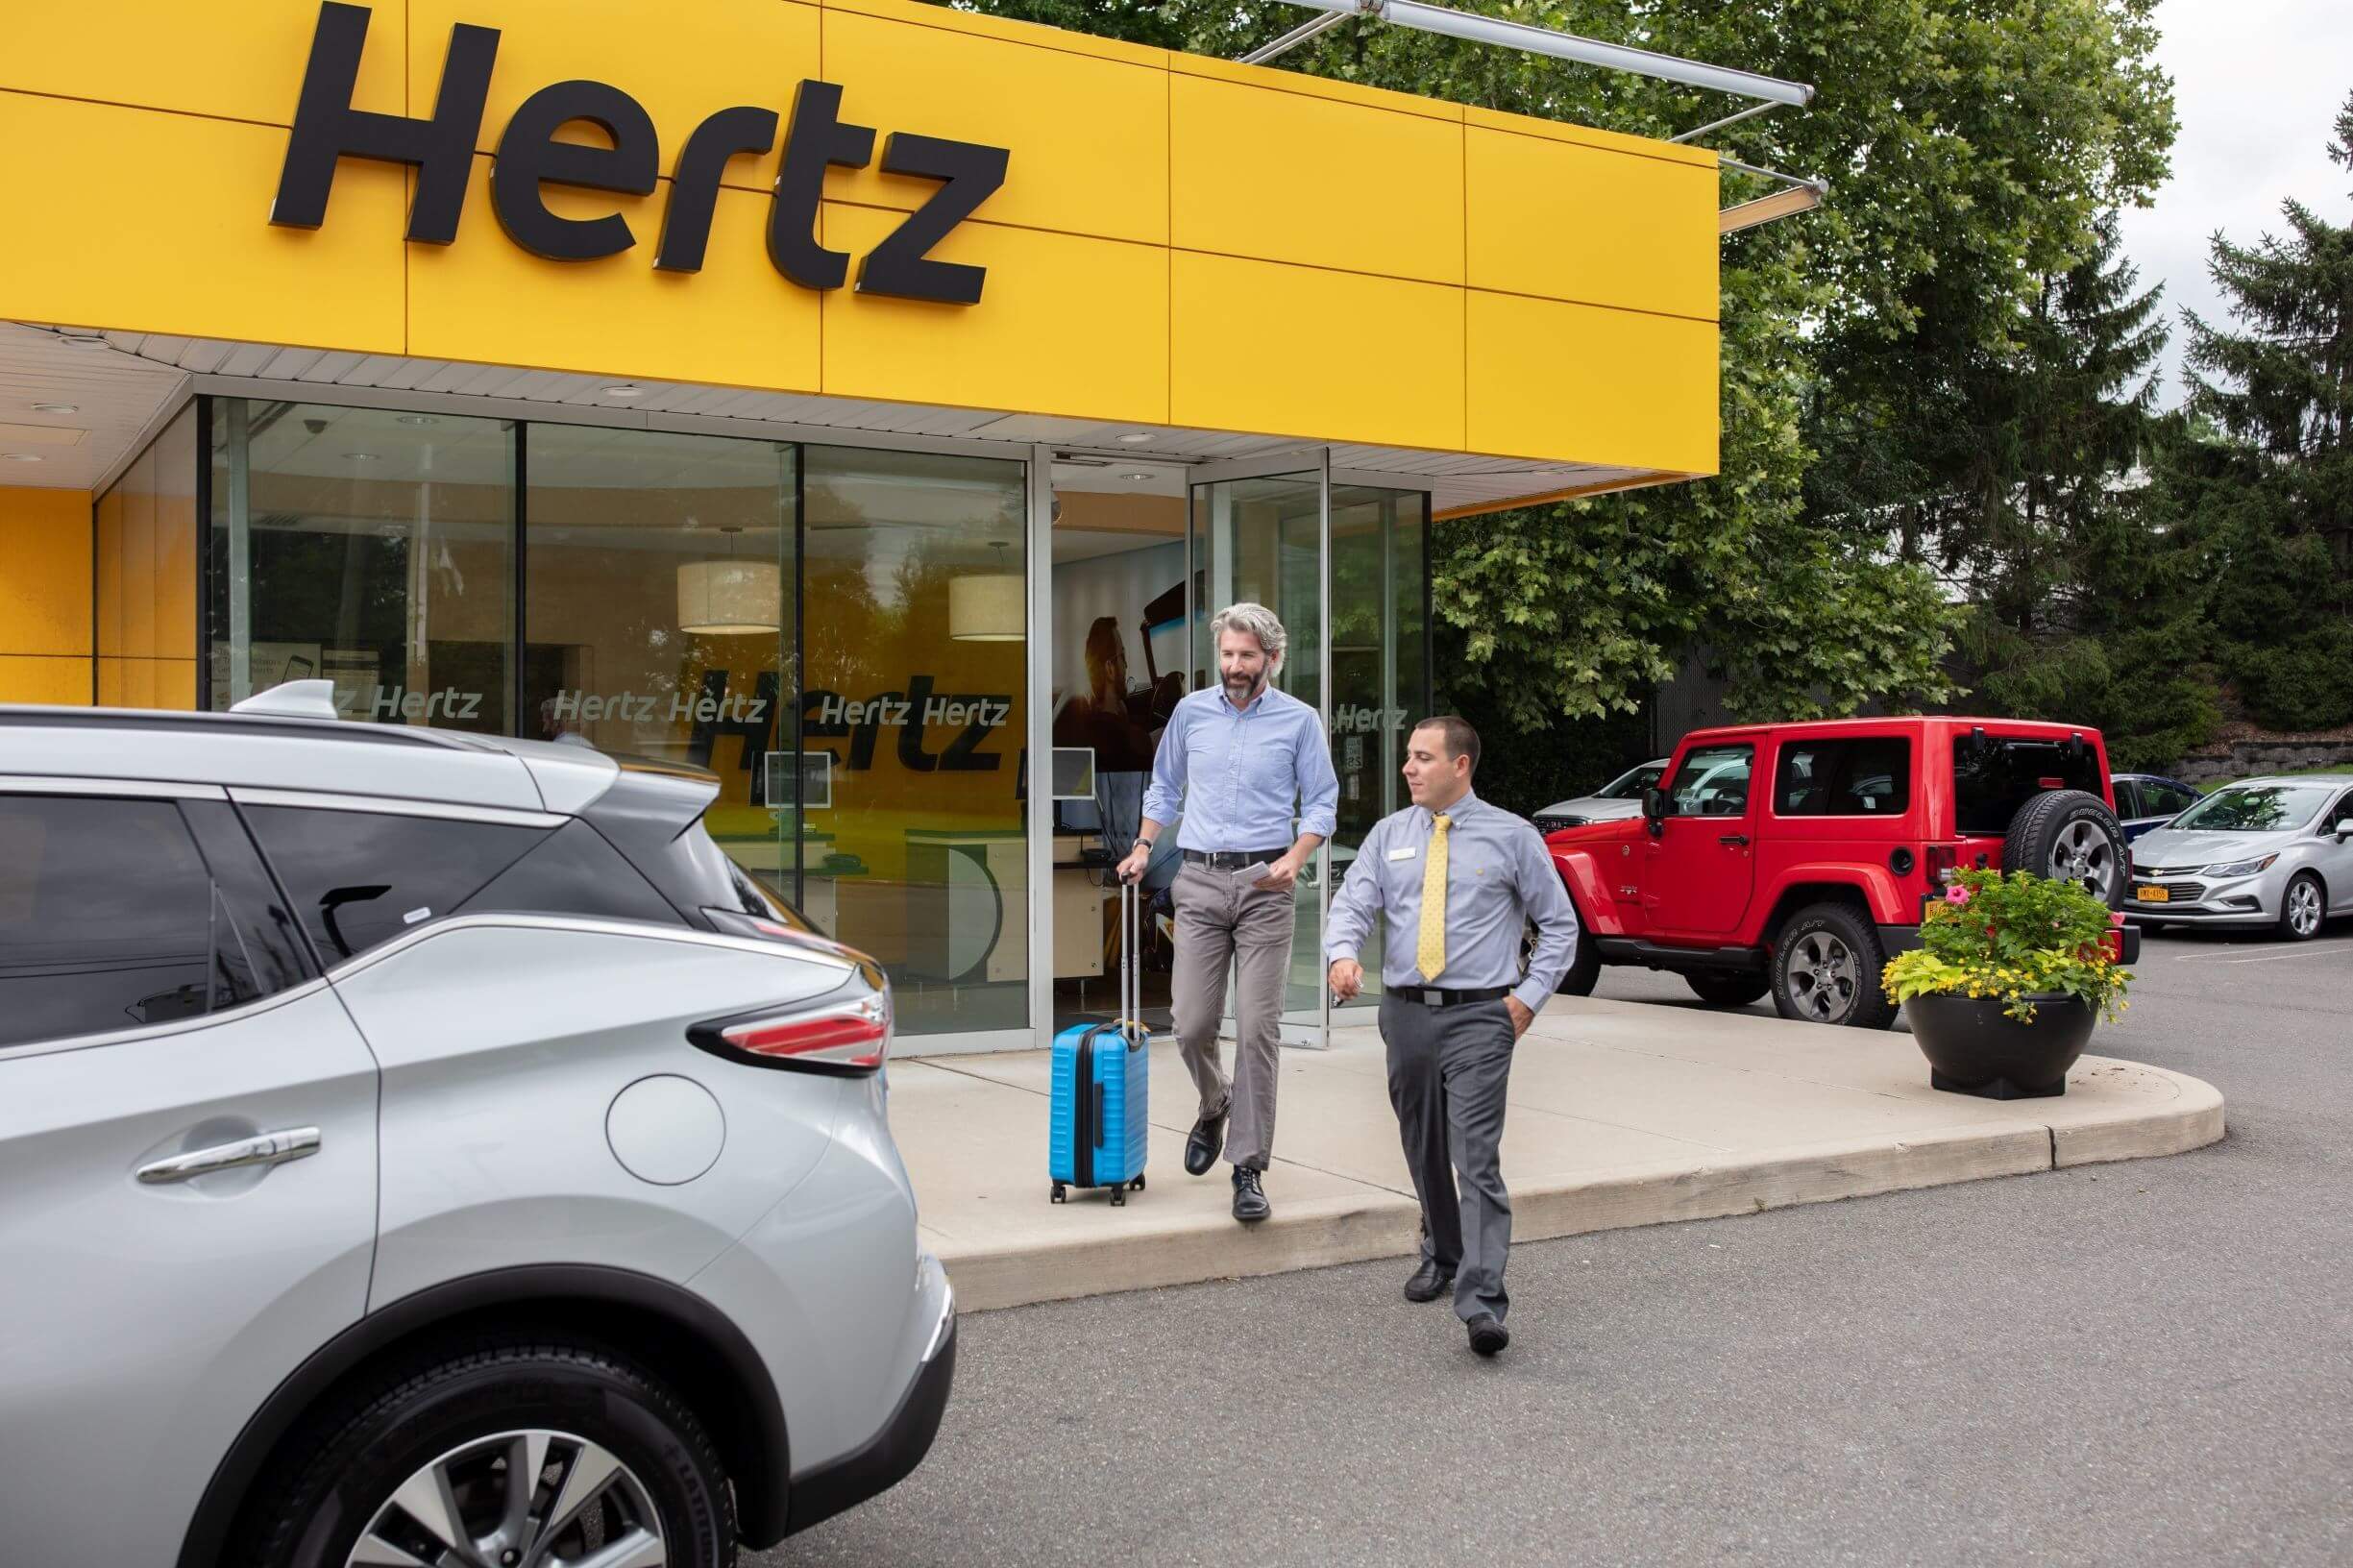 Hertz gets into the vehicle subscription business, pricing starts at $999 per month